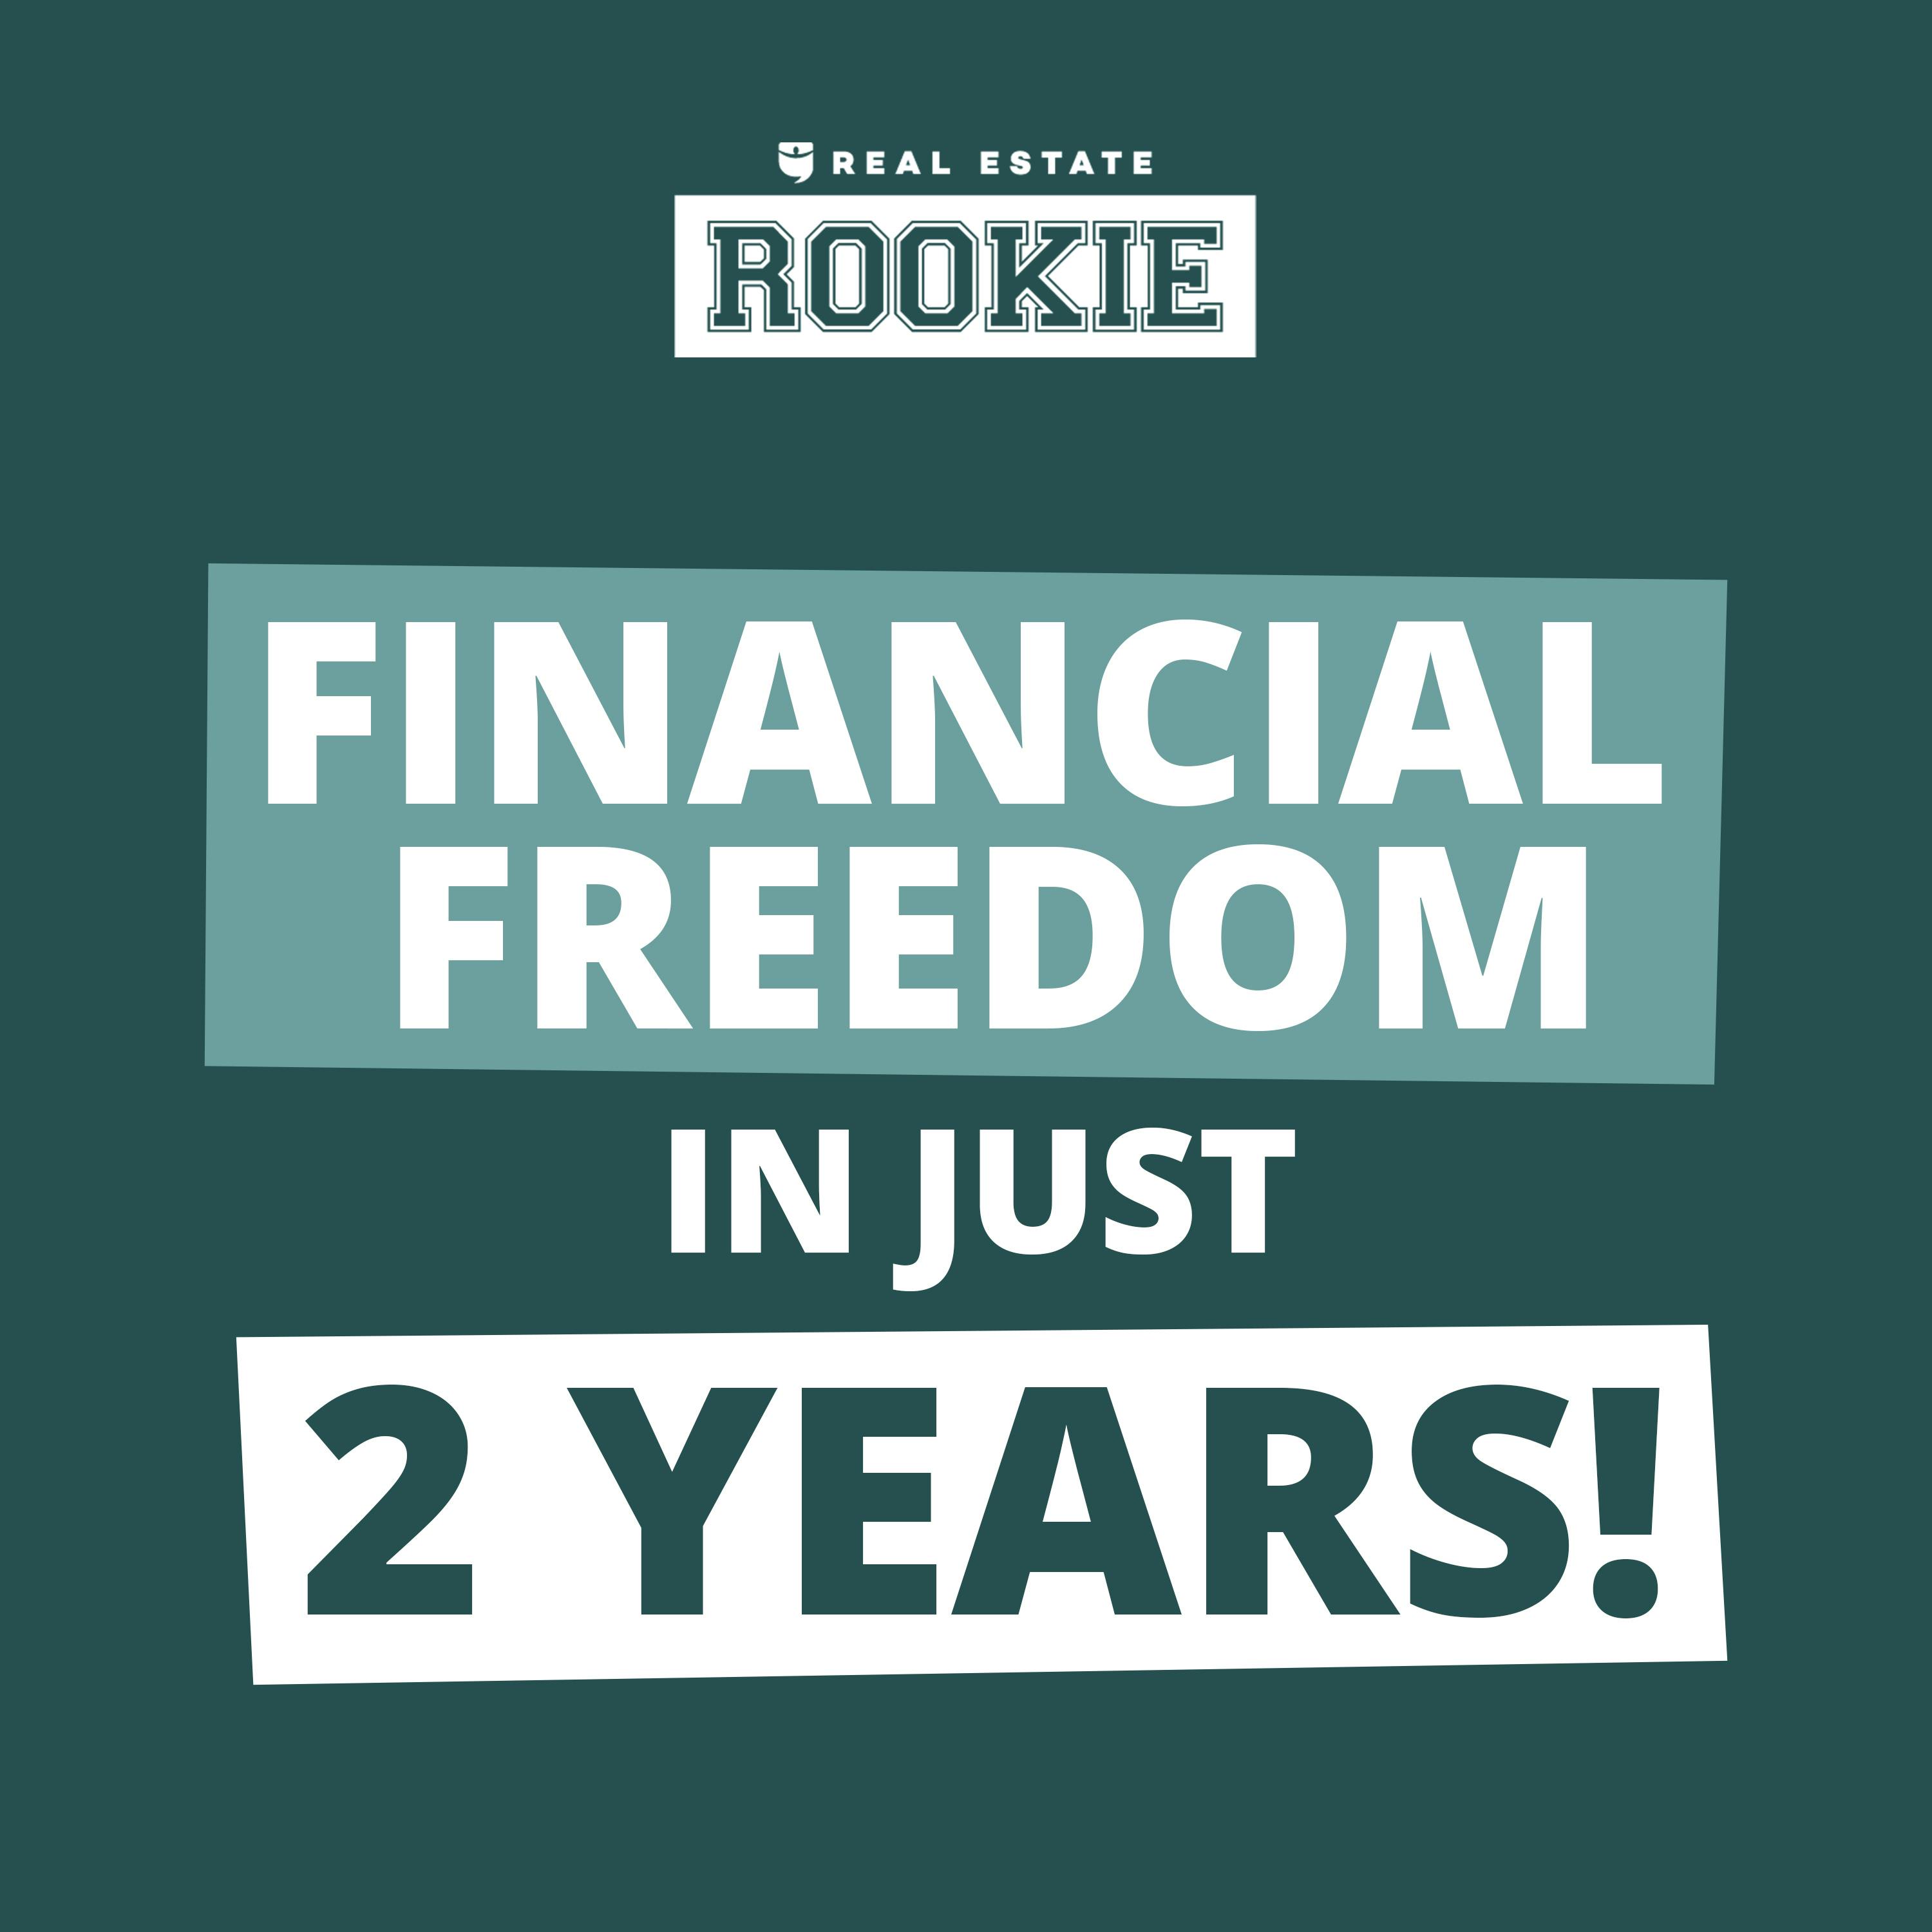 195: Financially Free in 2.5 Years by Buying “Low Risk” Rental Properties